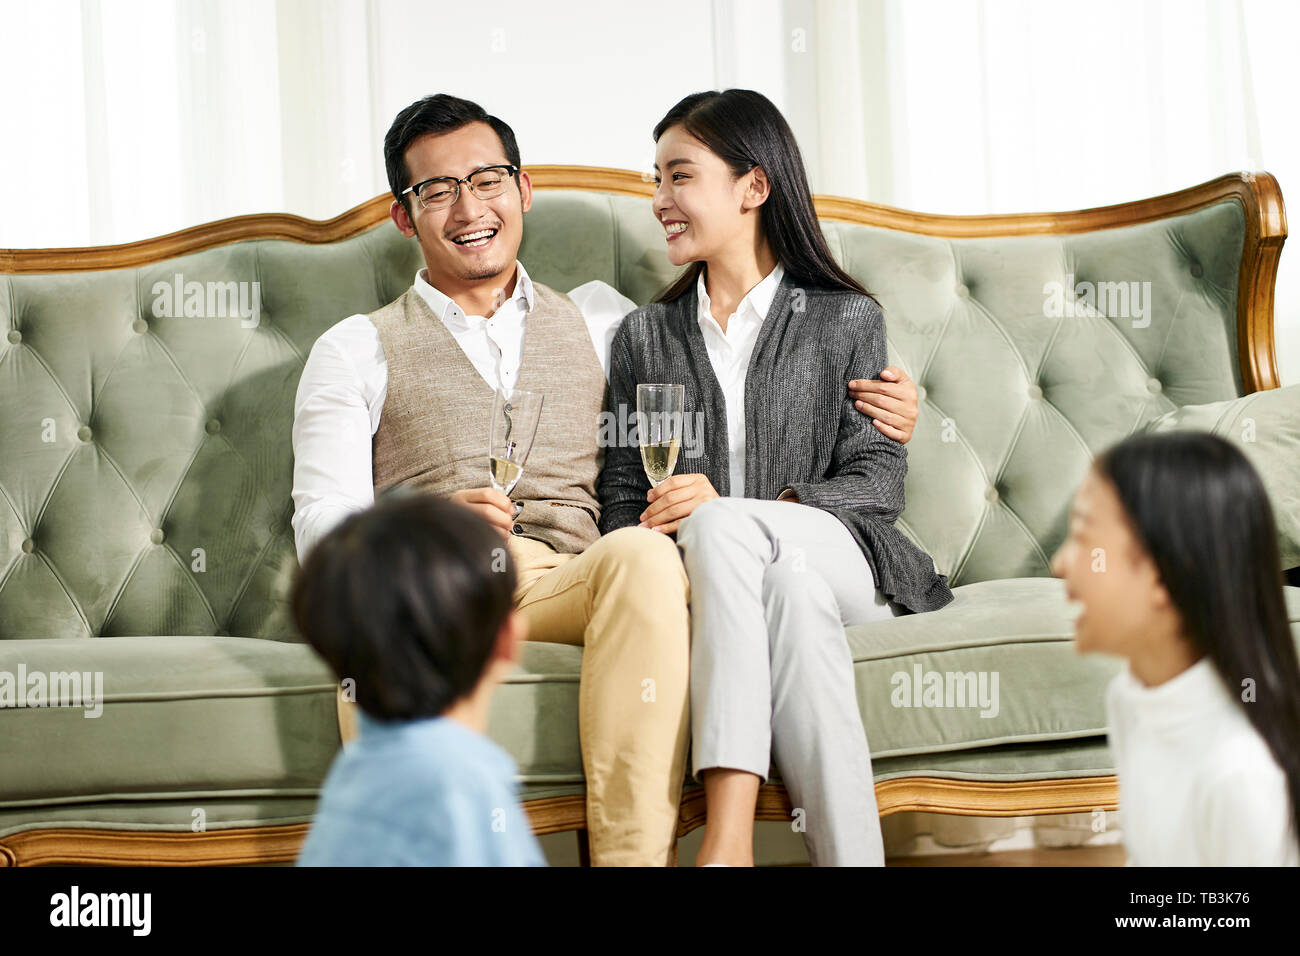 asian family with two children having a good time at home Stock Photo